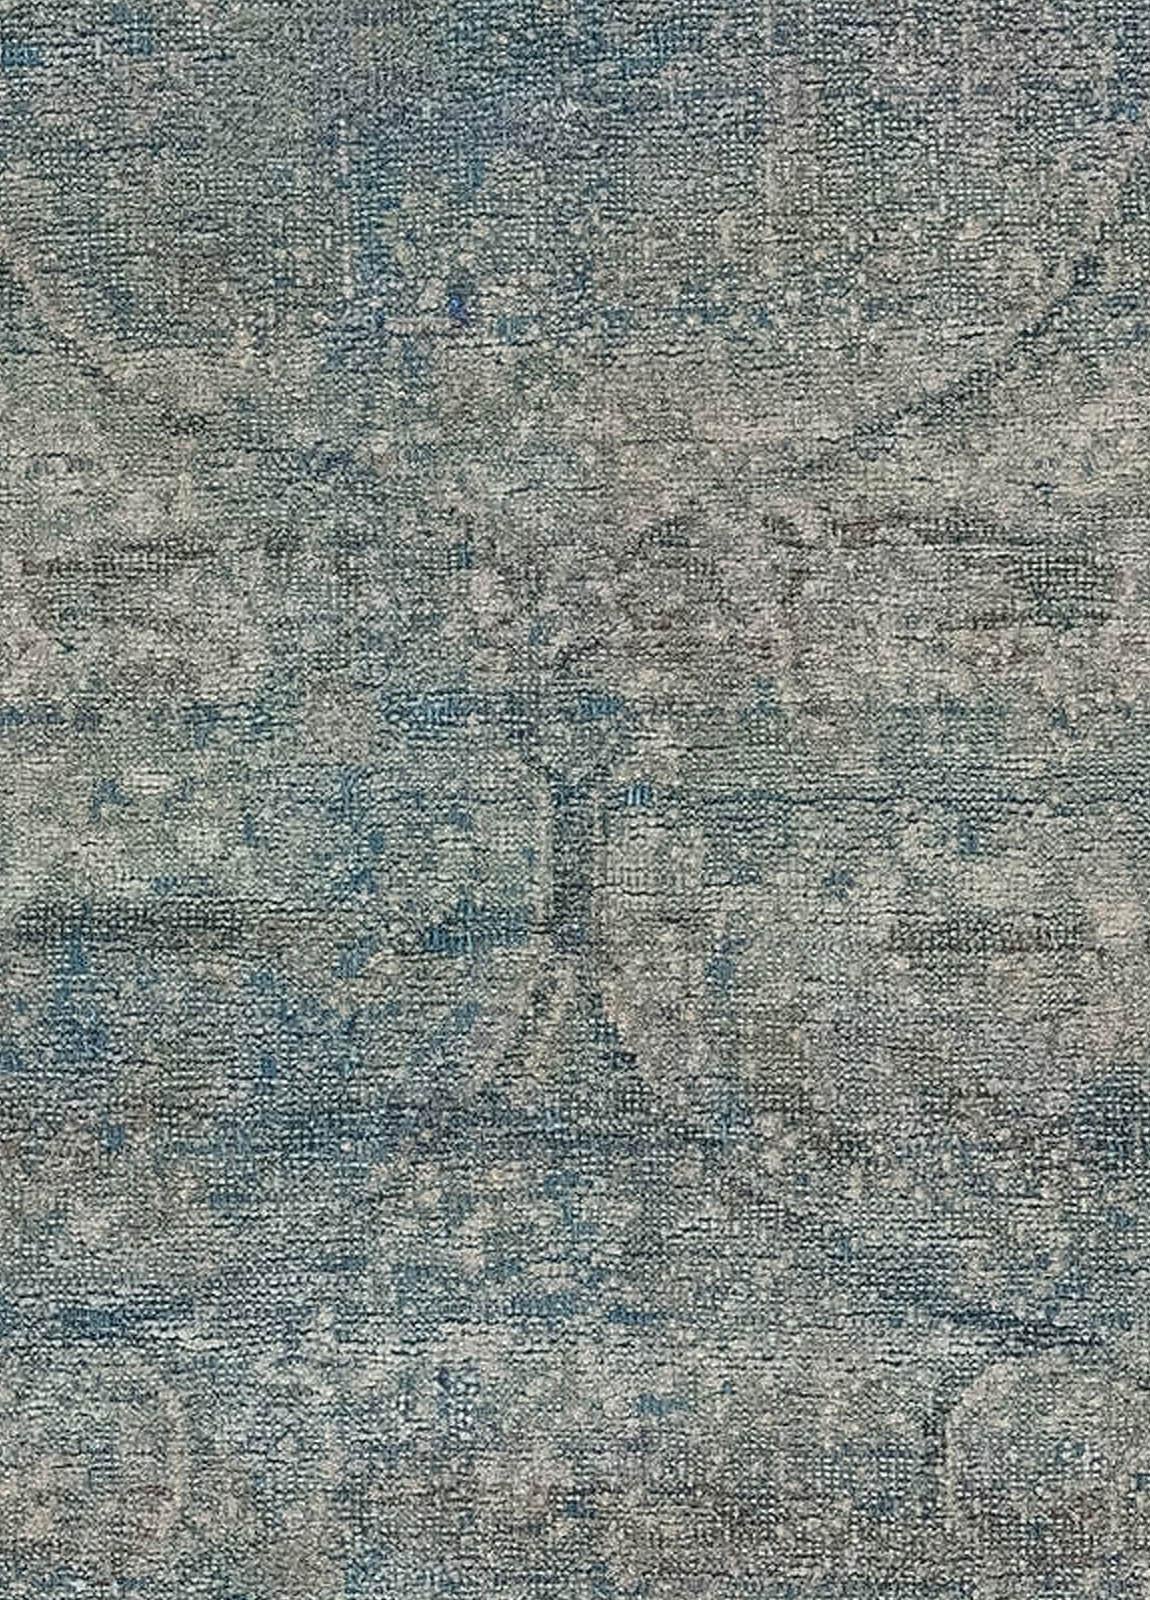 Custom traditional hand knotted silk and wool rug by Doris Leslie Blau
Size: 3'8